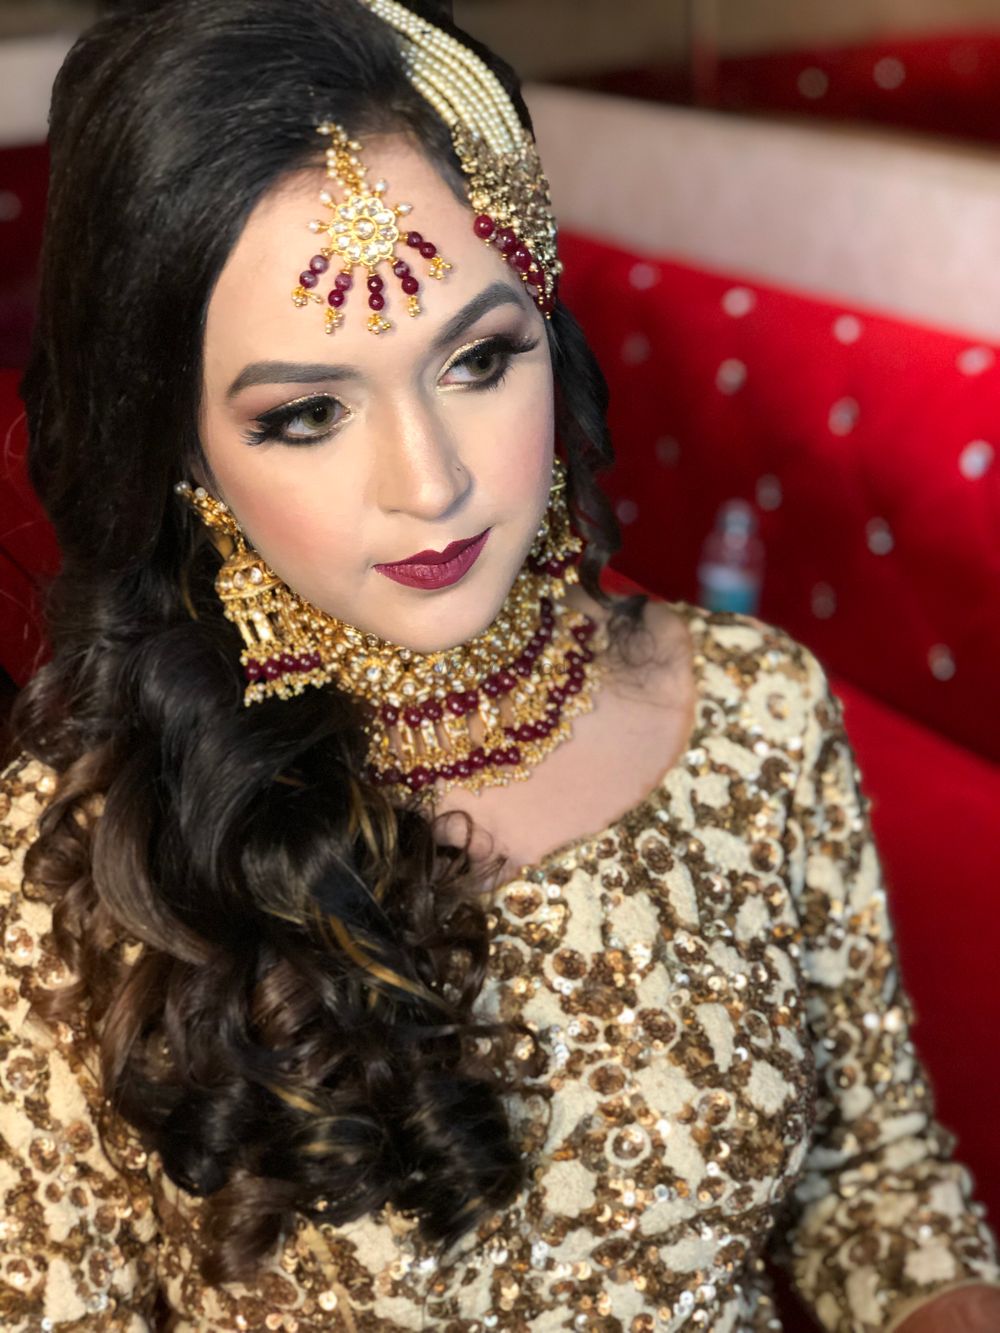 Photo From Insia- Muslim bride  - By Wakeuptomakeup by Pallavi Dua